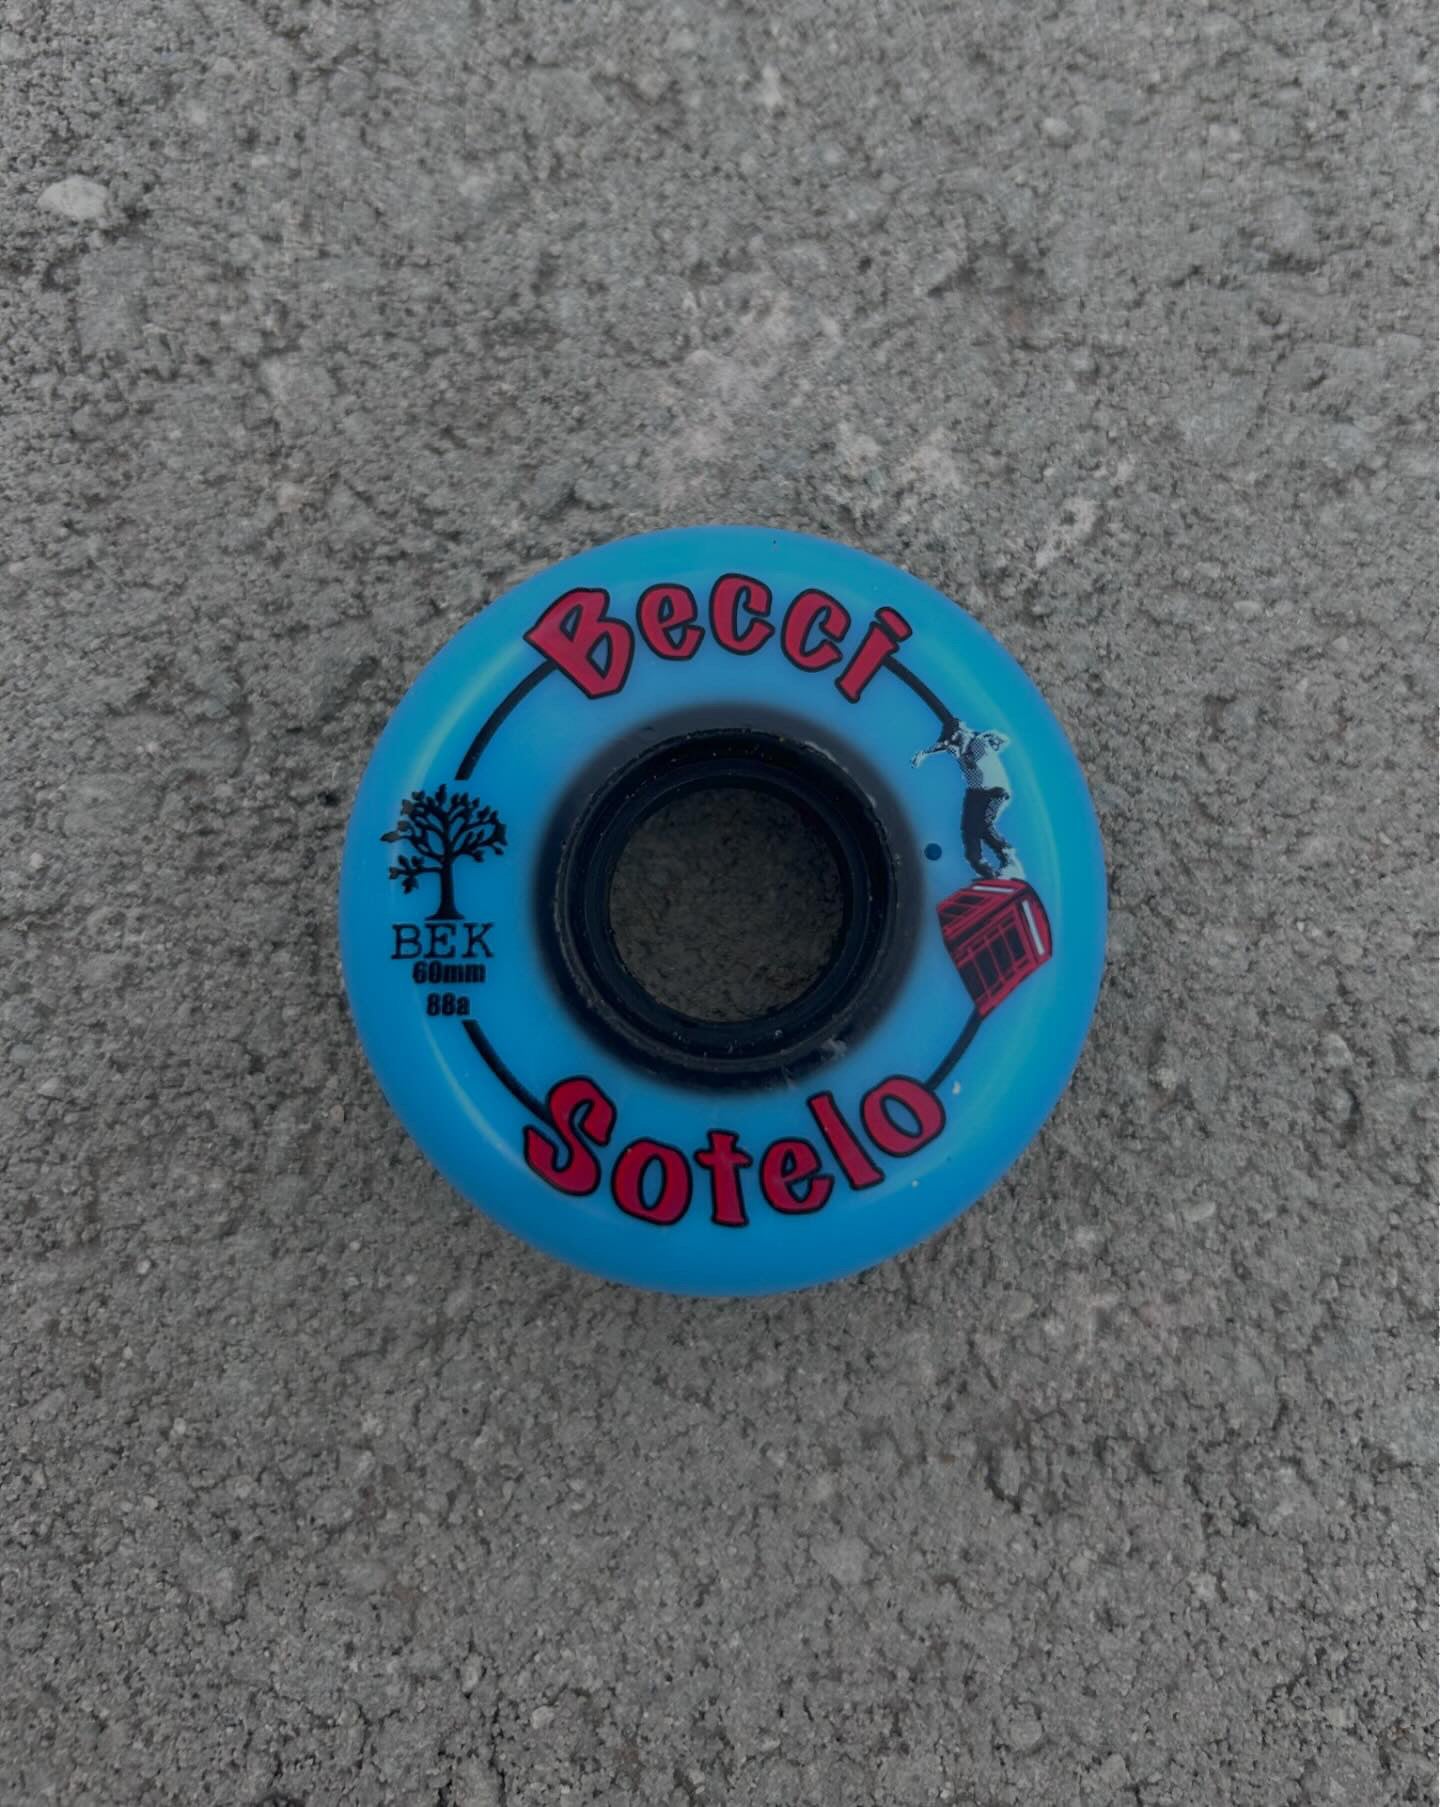 BEK Supply Co 60mm 88a  Beeci Sotelo signature inline skate wheels